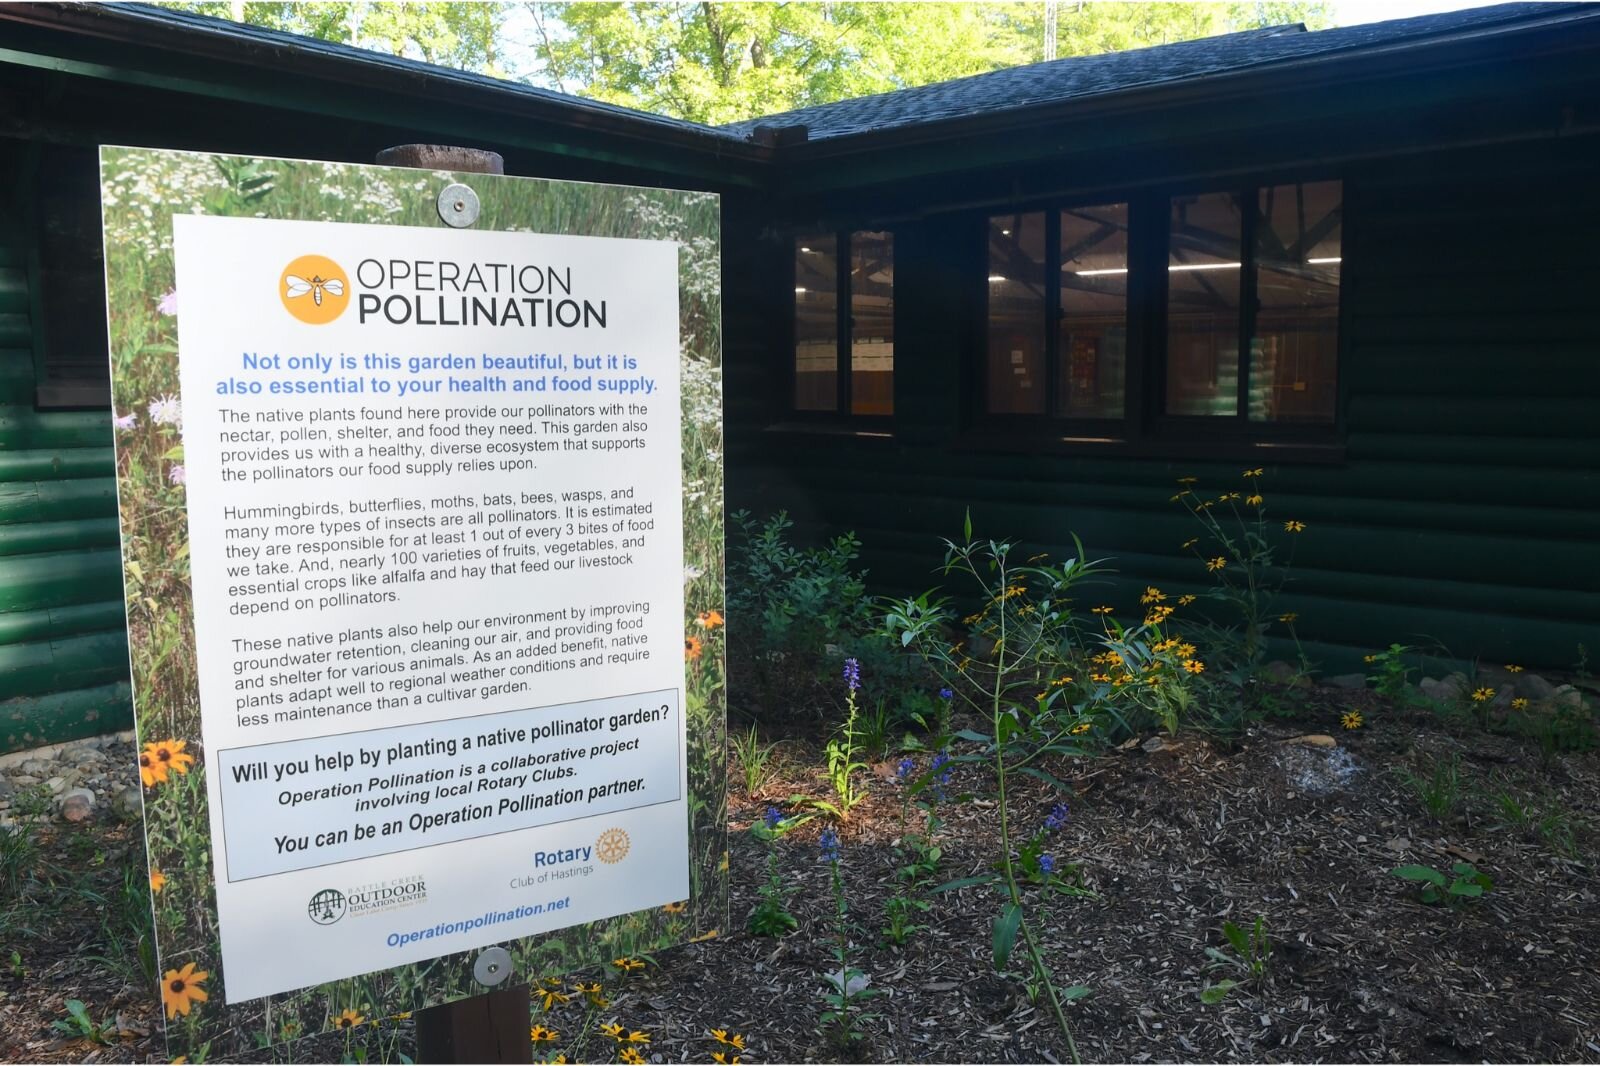 A pollination area outside one of the main buildings at Clear Lake Camp